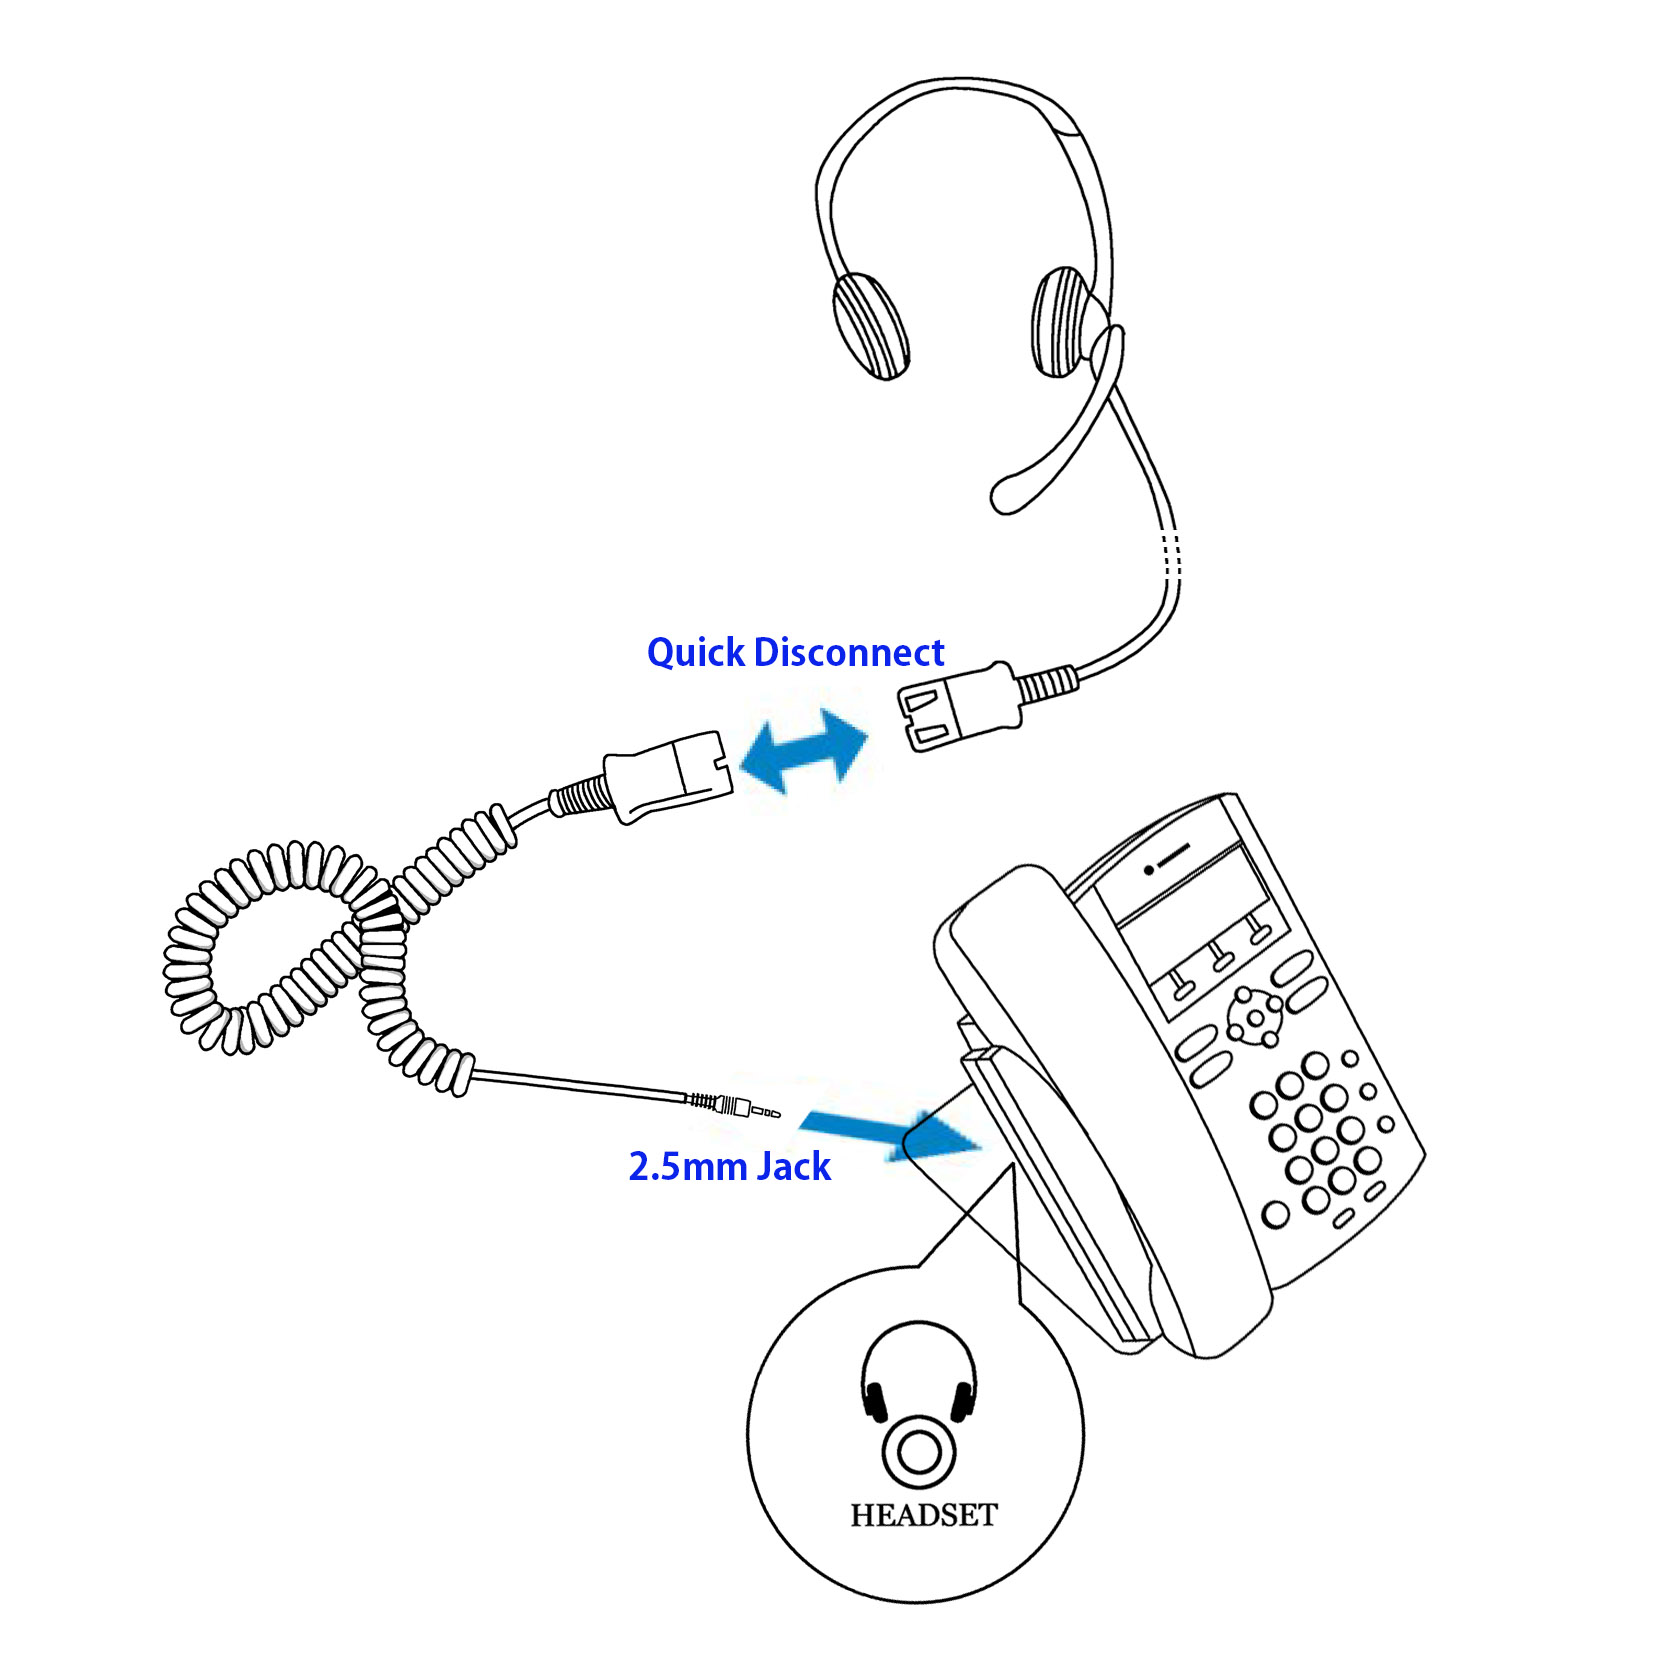 2.5 mm Quick Disconnect Plug Desk Phone headset for Cordless Phone like Vtech, Panasonic for Customer Service - image 2 of 7